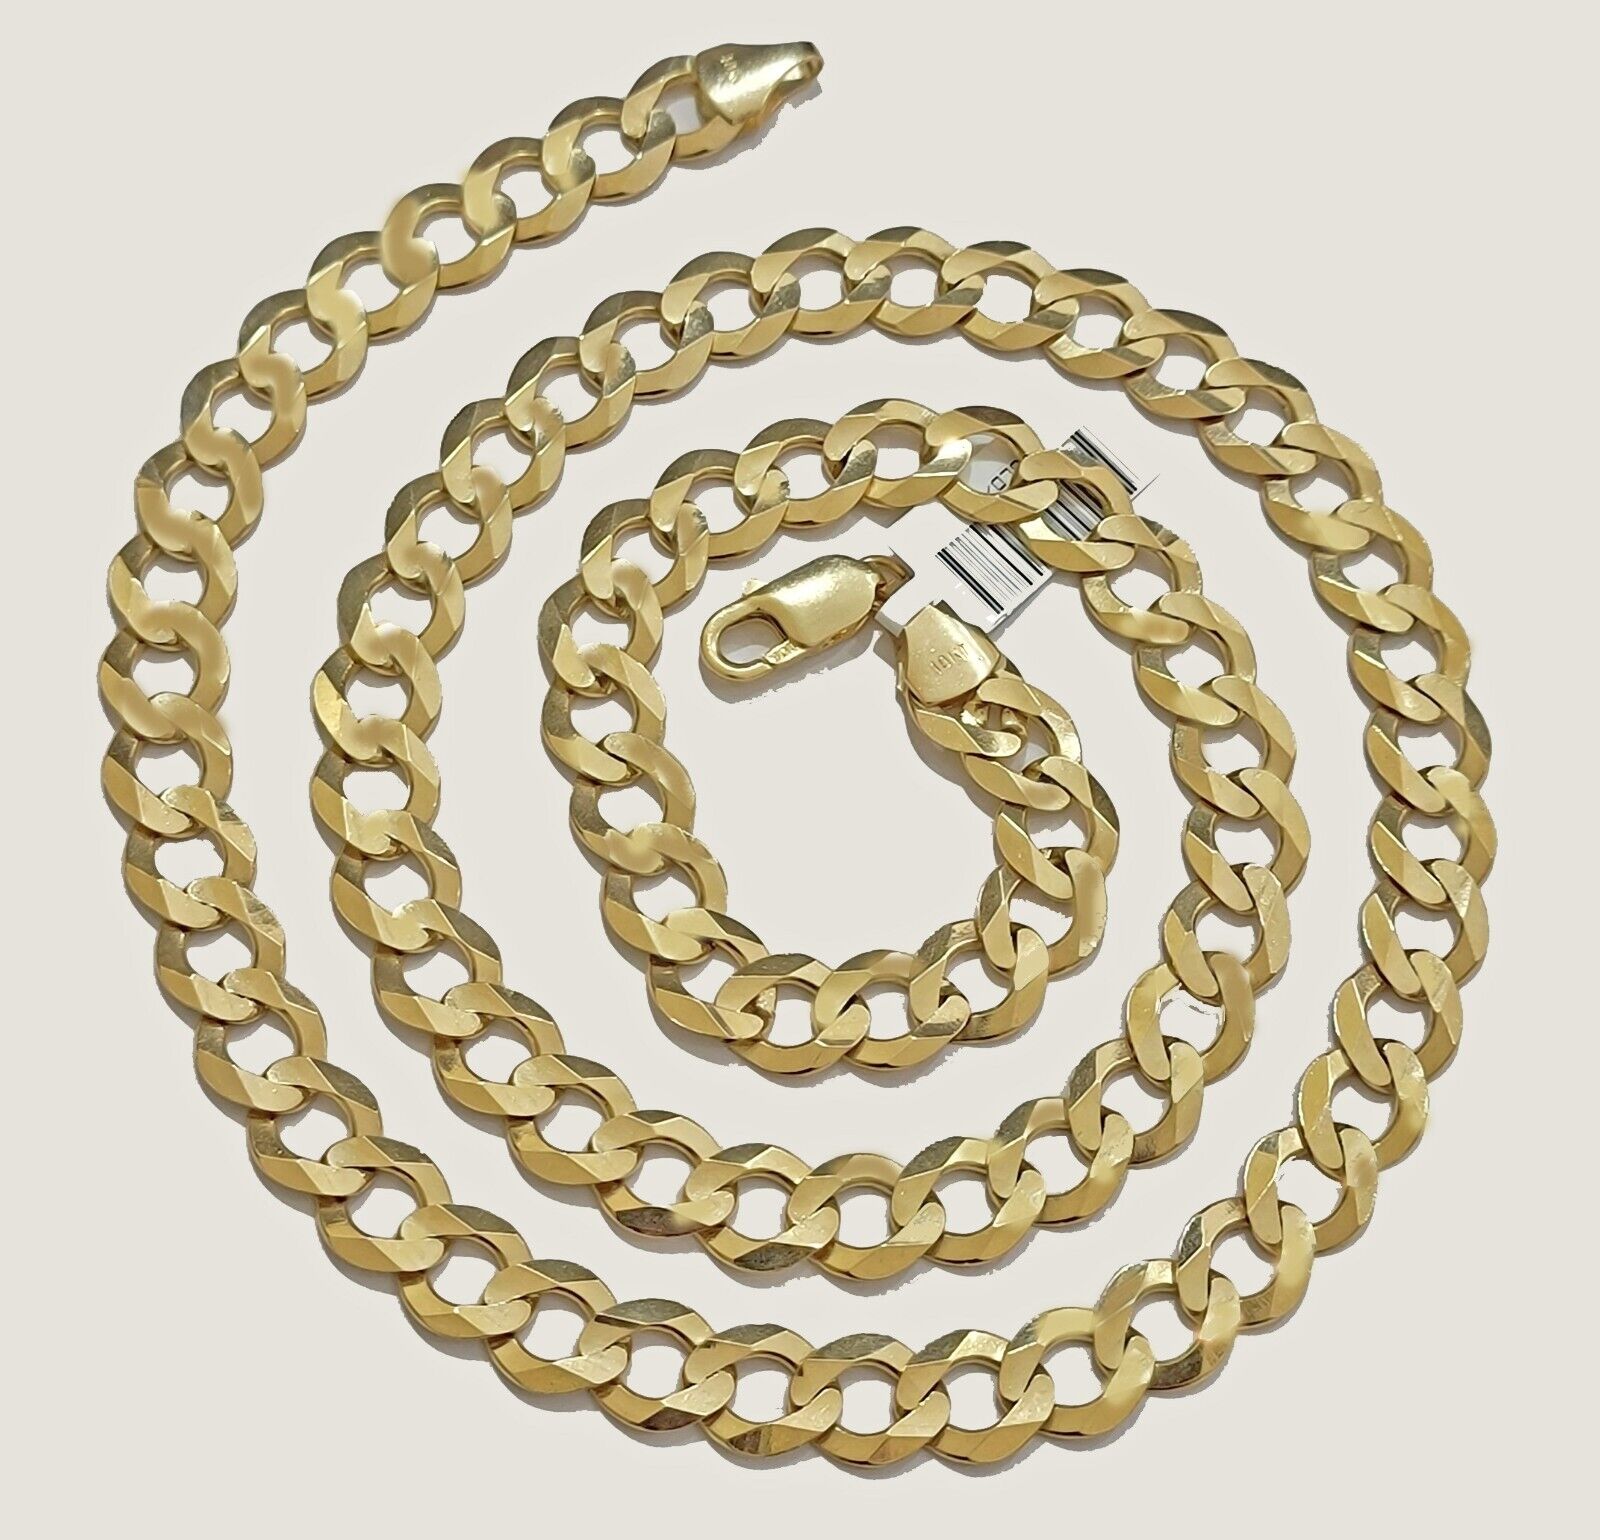 10mm 10k Yellow Gold Cuban Curb Link Chain Necklace 24 Inch Mens REAL 10KT SOLID